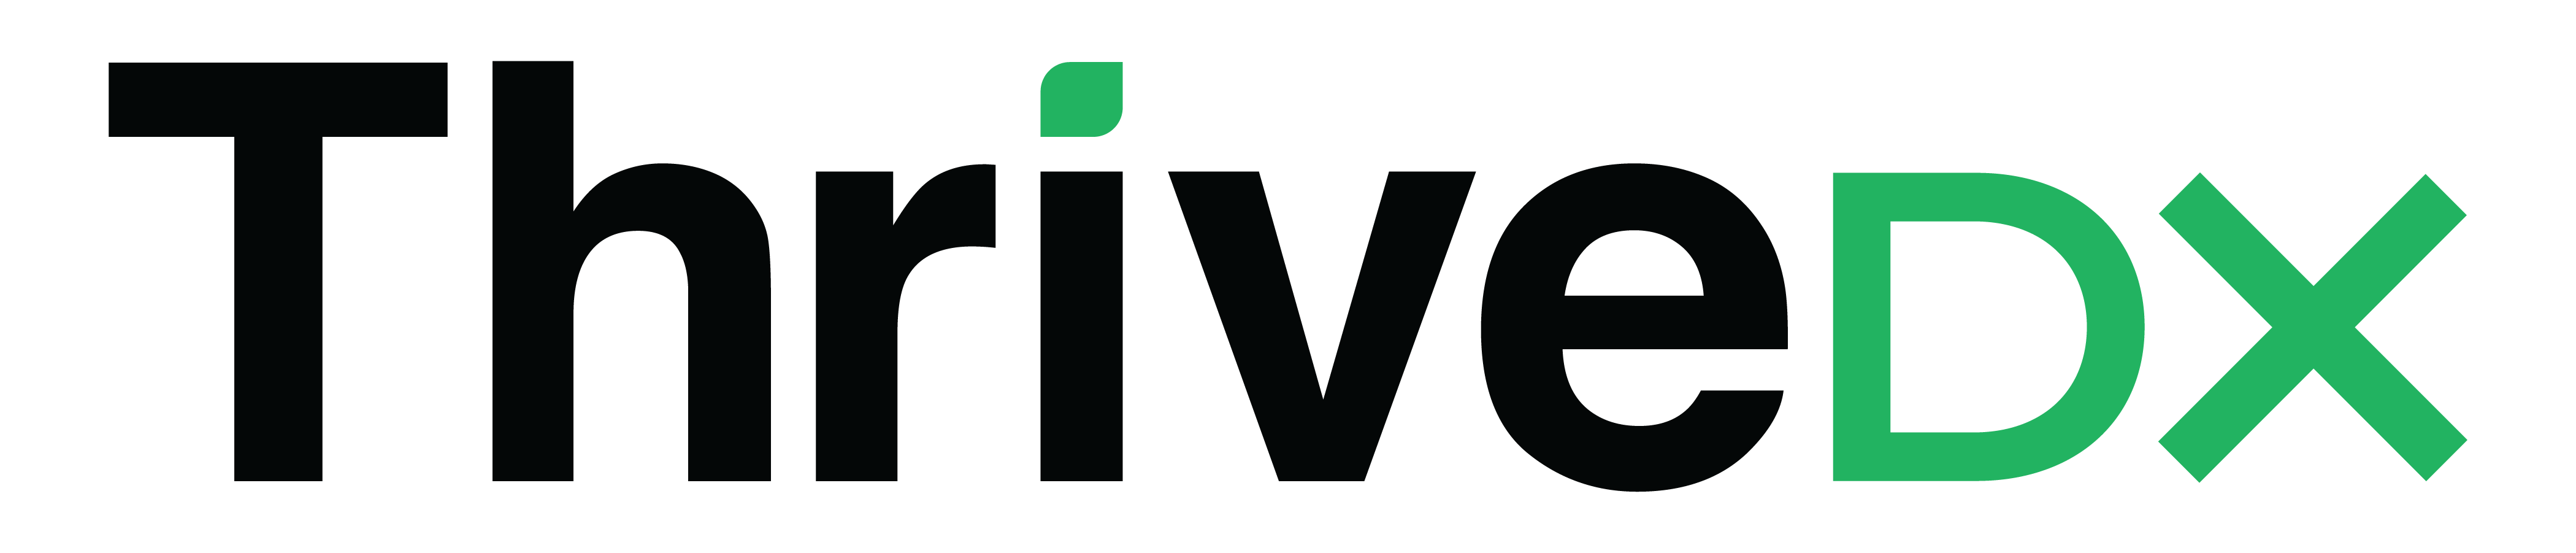 Thrive-Logo-Black-wGreen-Accent (2).png